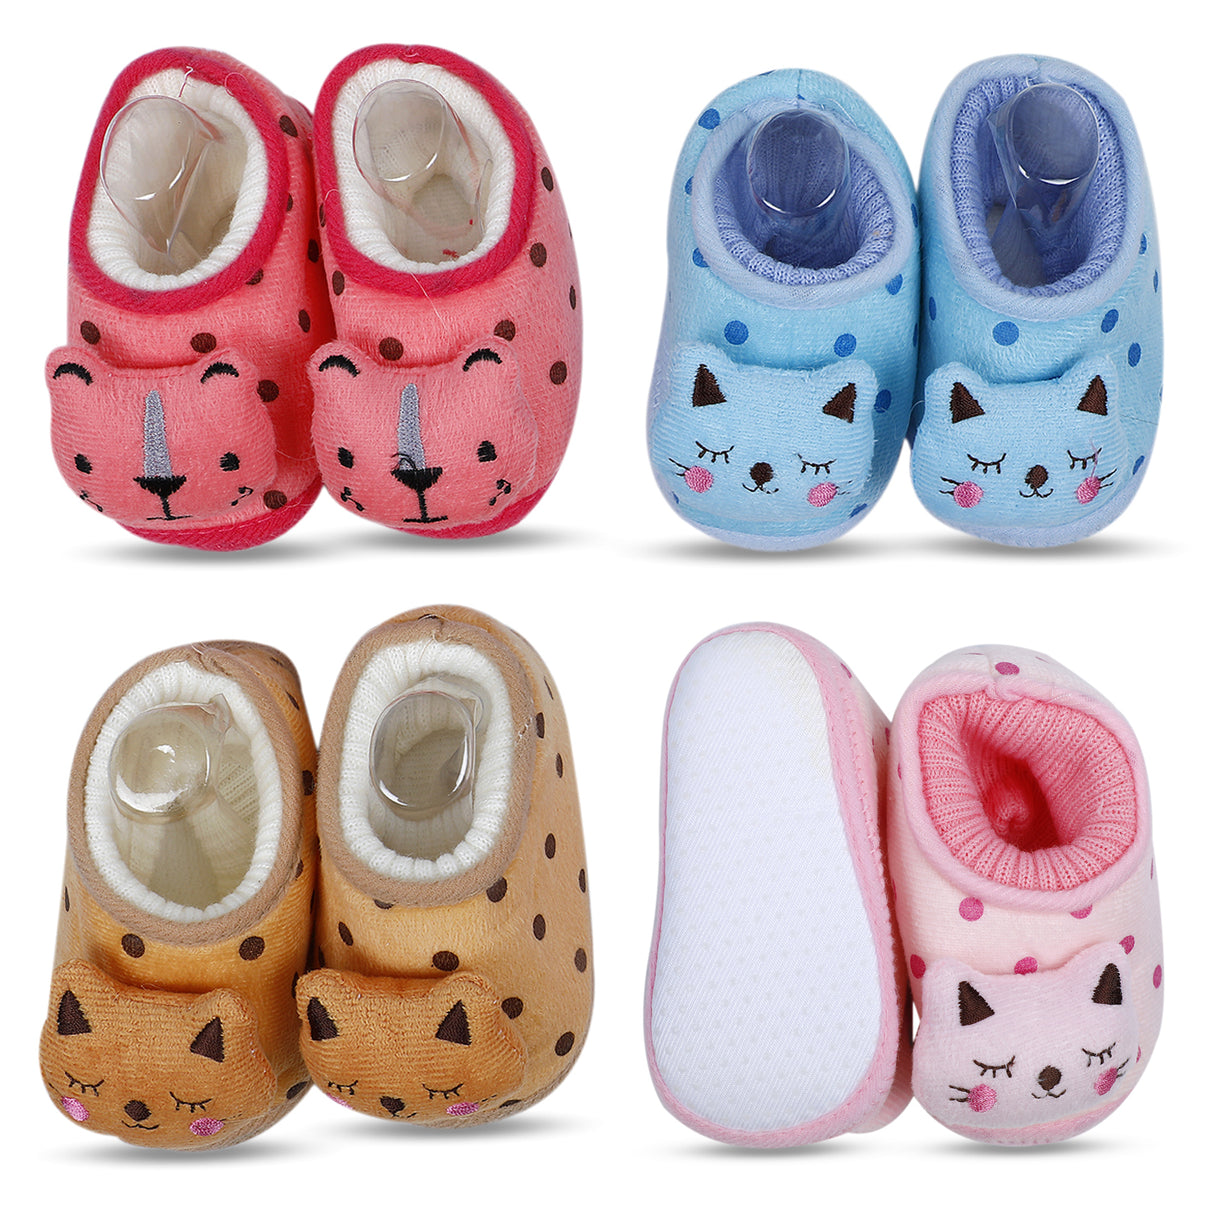 Sleeping Cat Soft and Cozy Cotton Anti-Skid 3D Booties